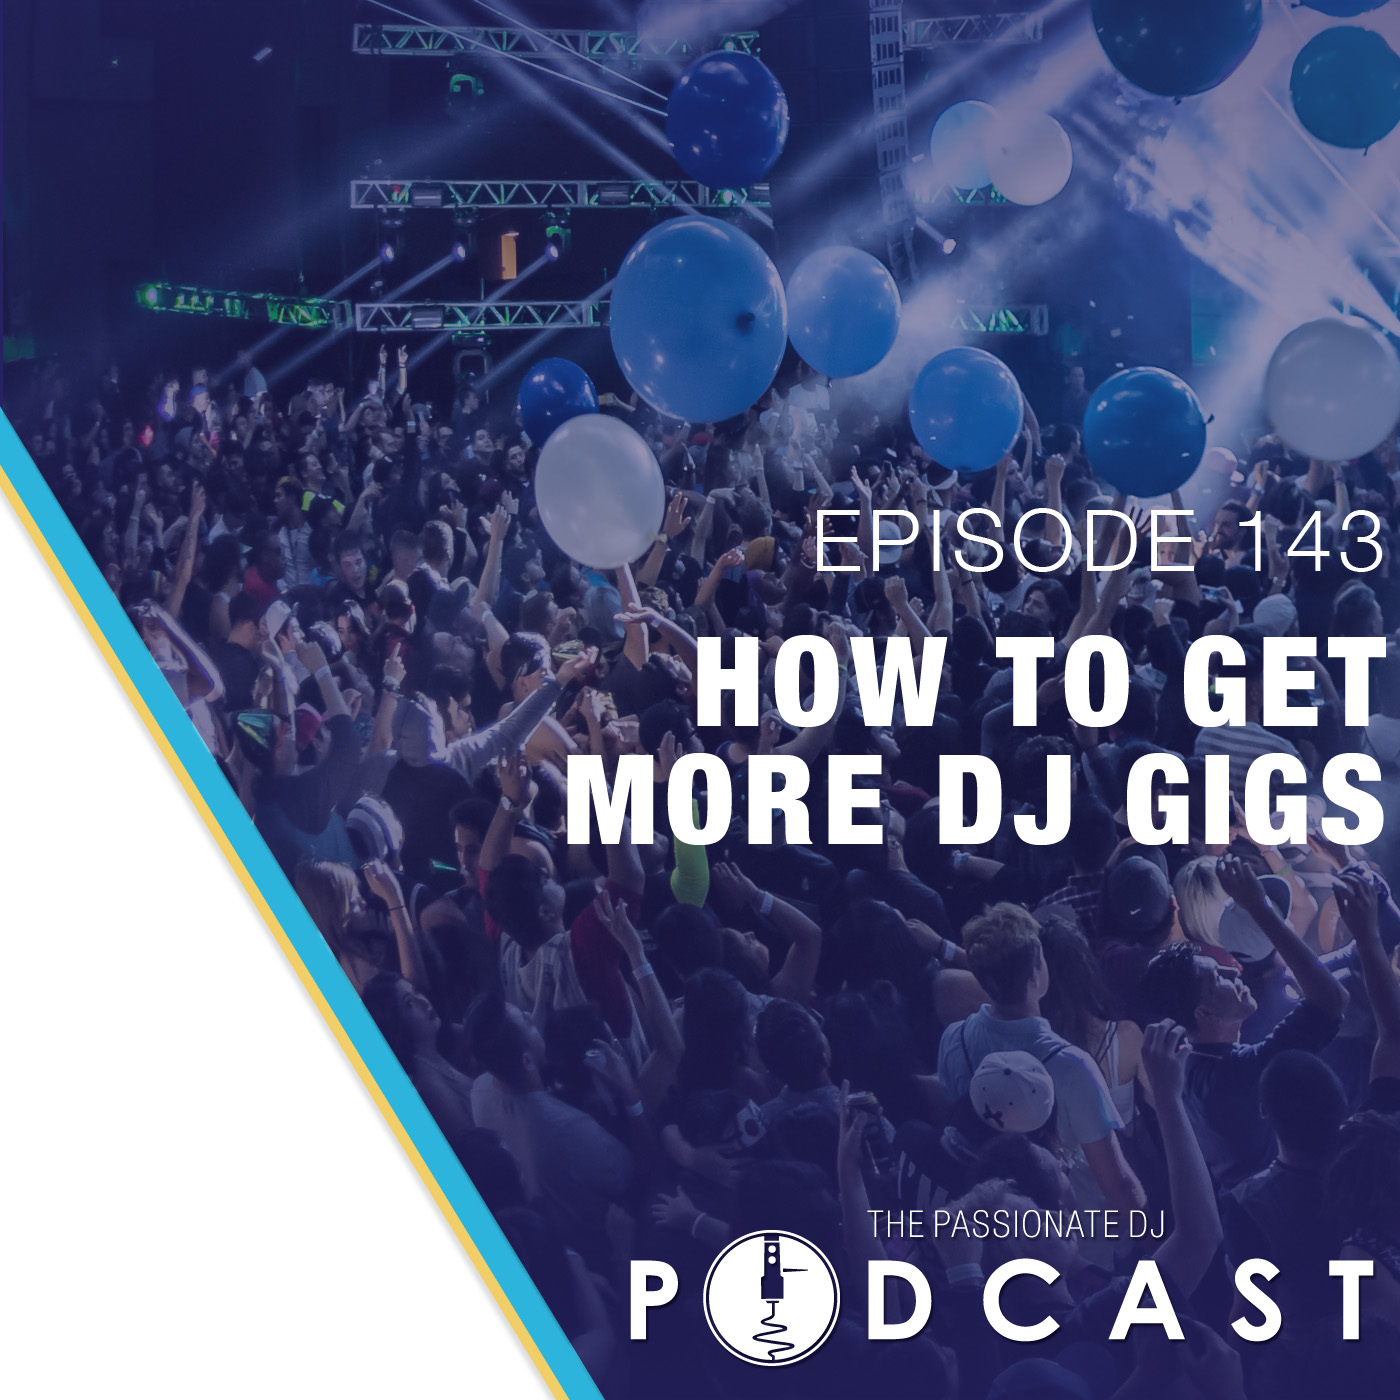 Episode 143: How to Get More DJ Gigs